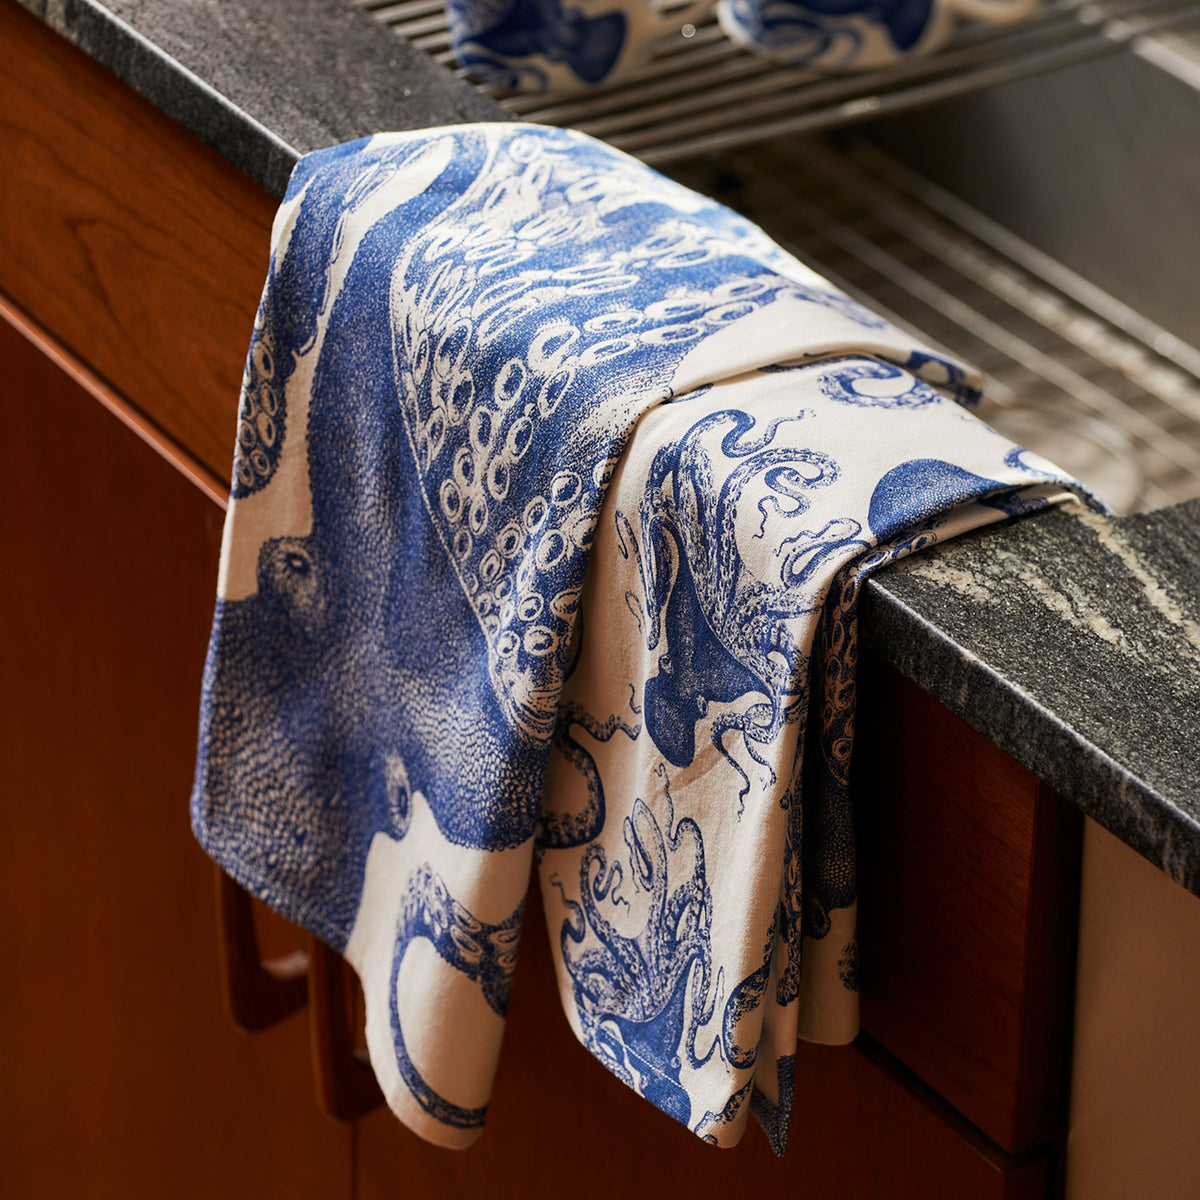 A blue and white **Lucy Kitchen Towel** from the **Caskata** set, one of your favorite kitchen companions, hangs over the edge of a countertop next to a dish drying rack.